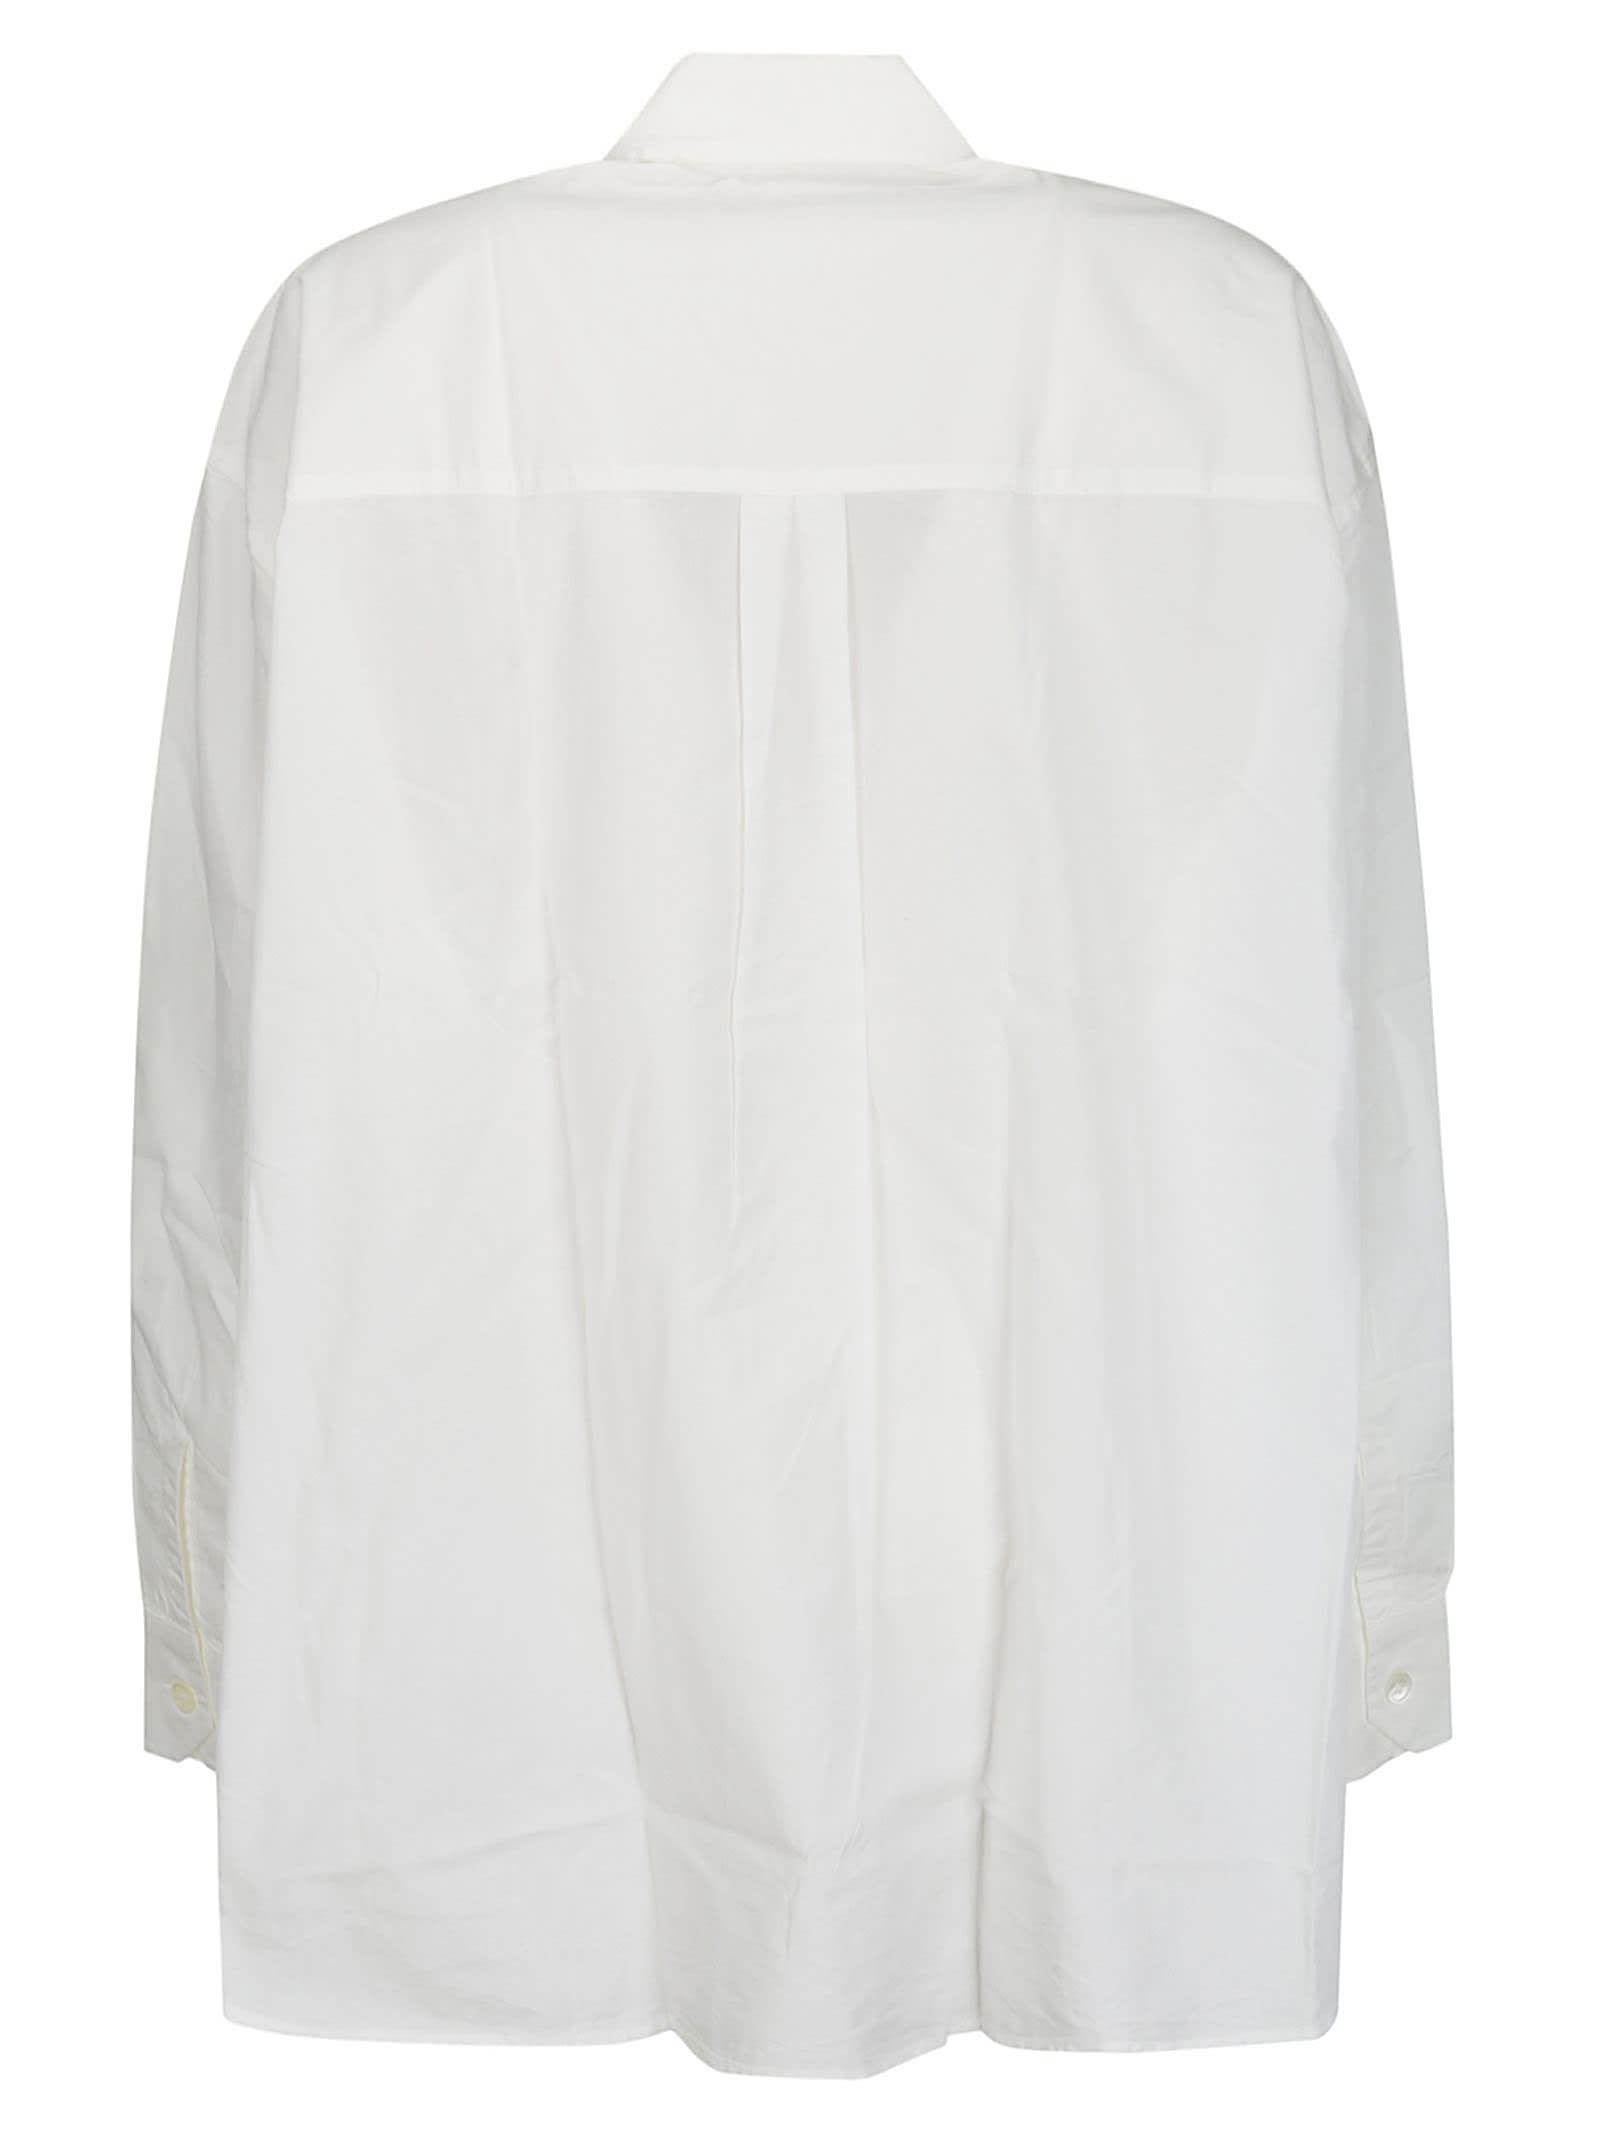 Shop Our Legacy Borrowed Shirt In White Peached Cupro